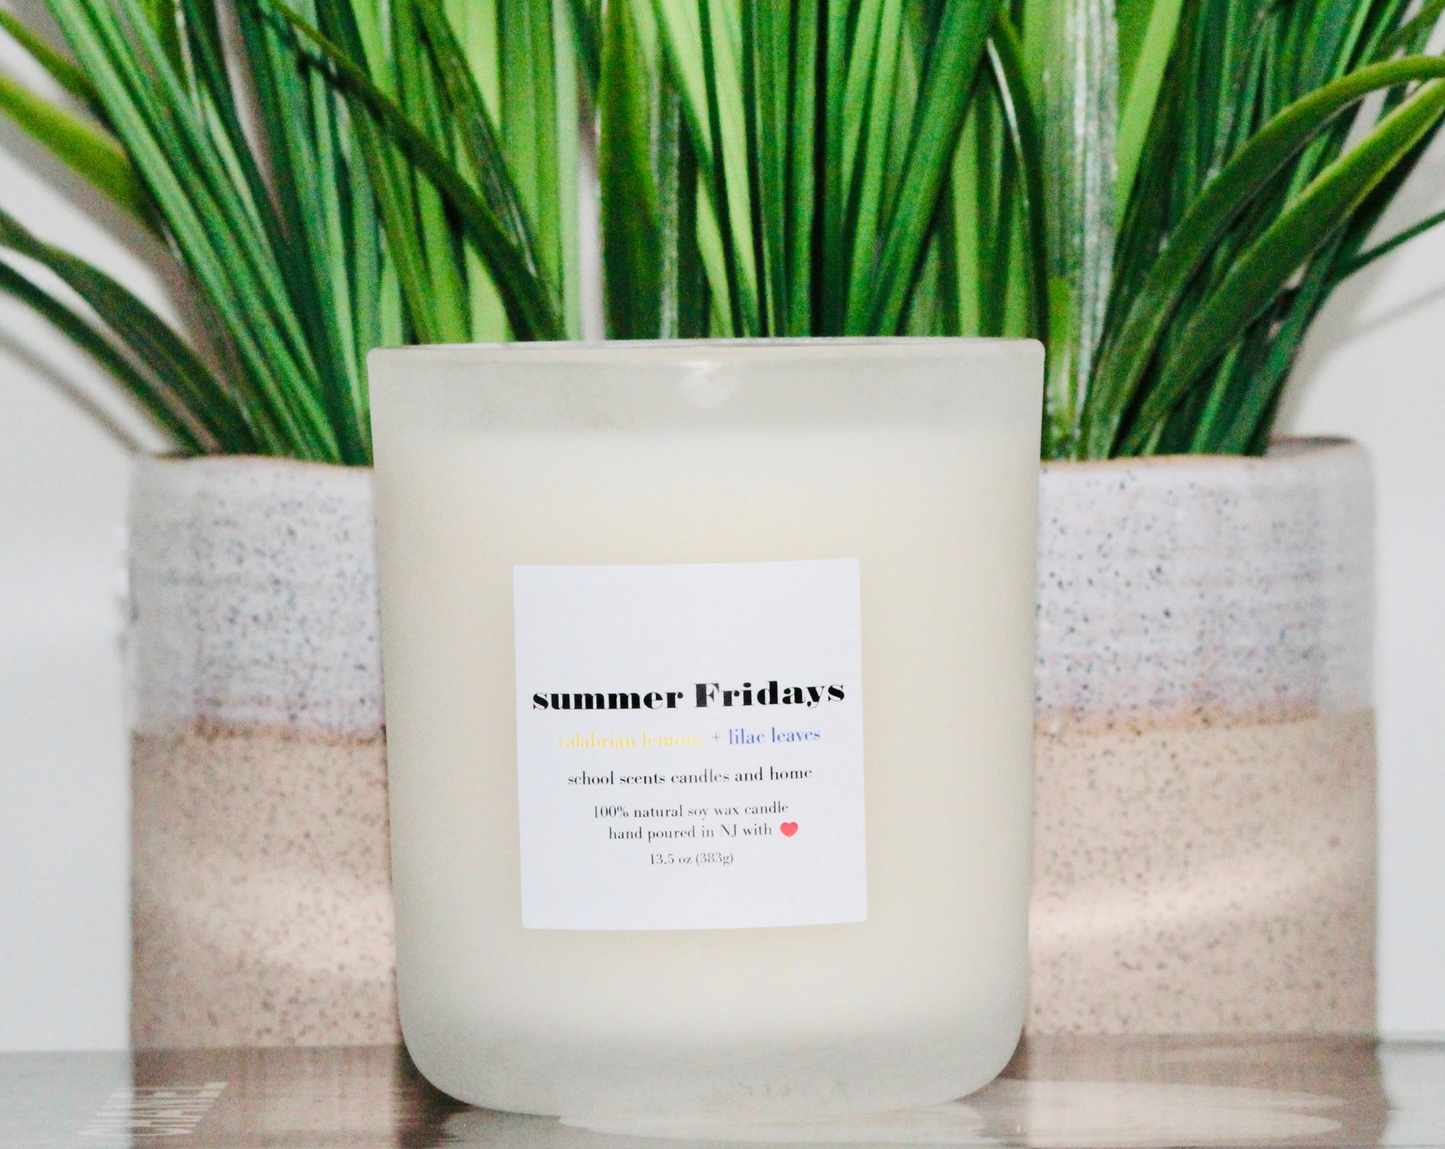 WoodWick Candles - Summer Fridays every day! At The Beach candle combines  notes of tropical citrus, creamy coconuts and cool sea breezes.